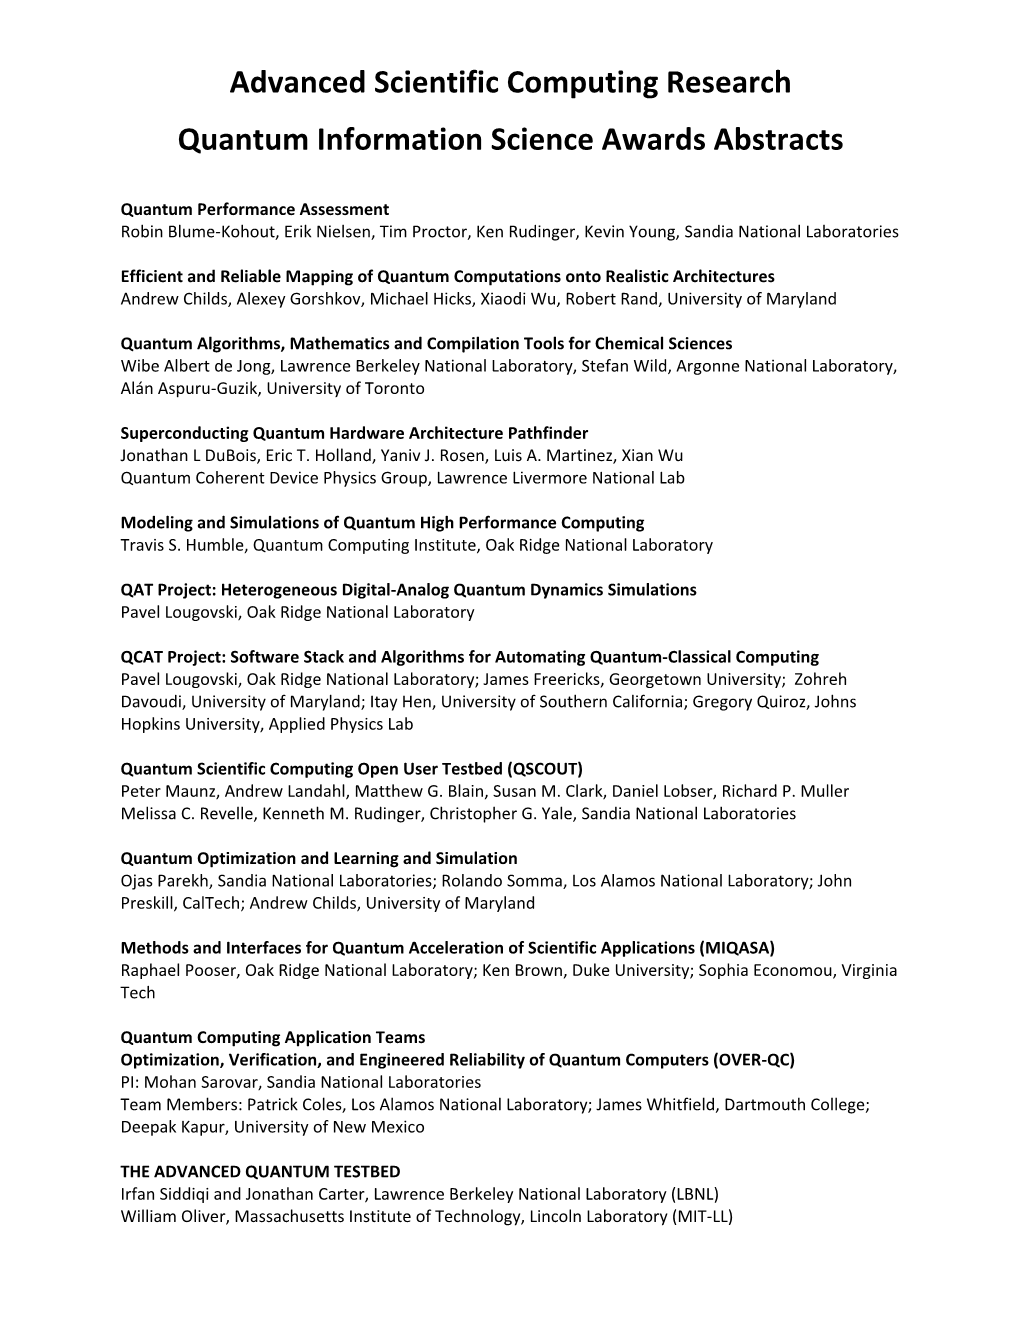 Advanced Scientific Computing Research Quantum Information Science Awards Abstracts